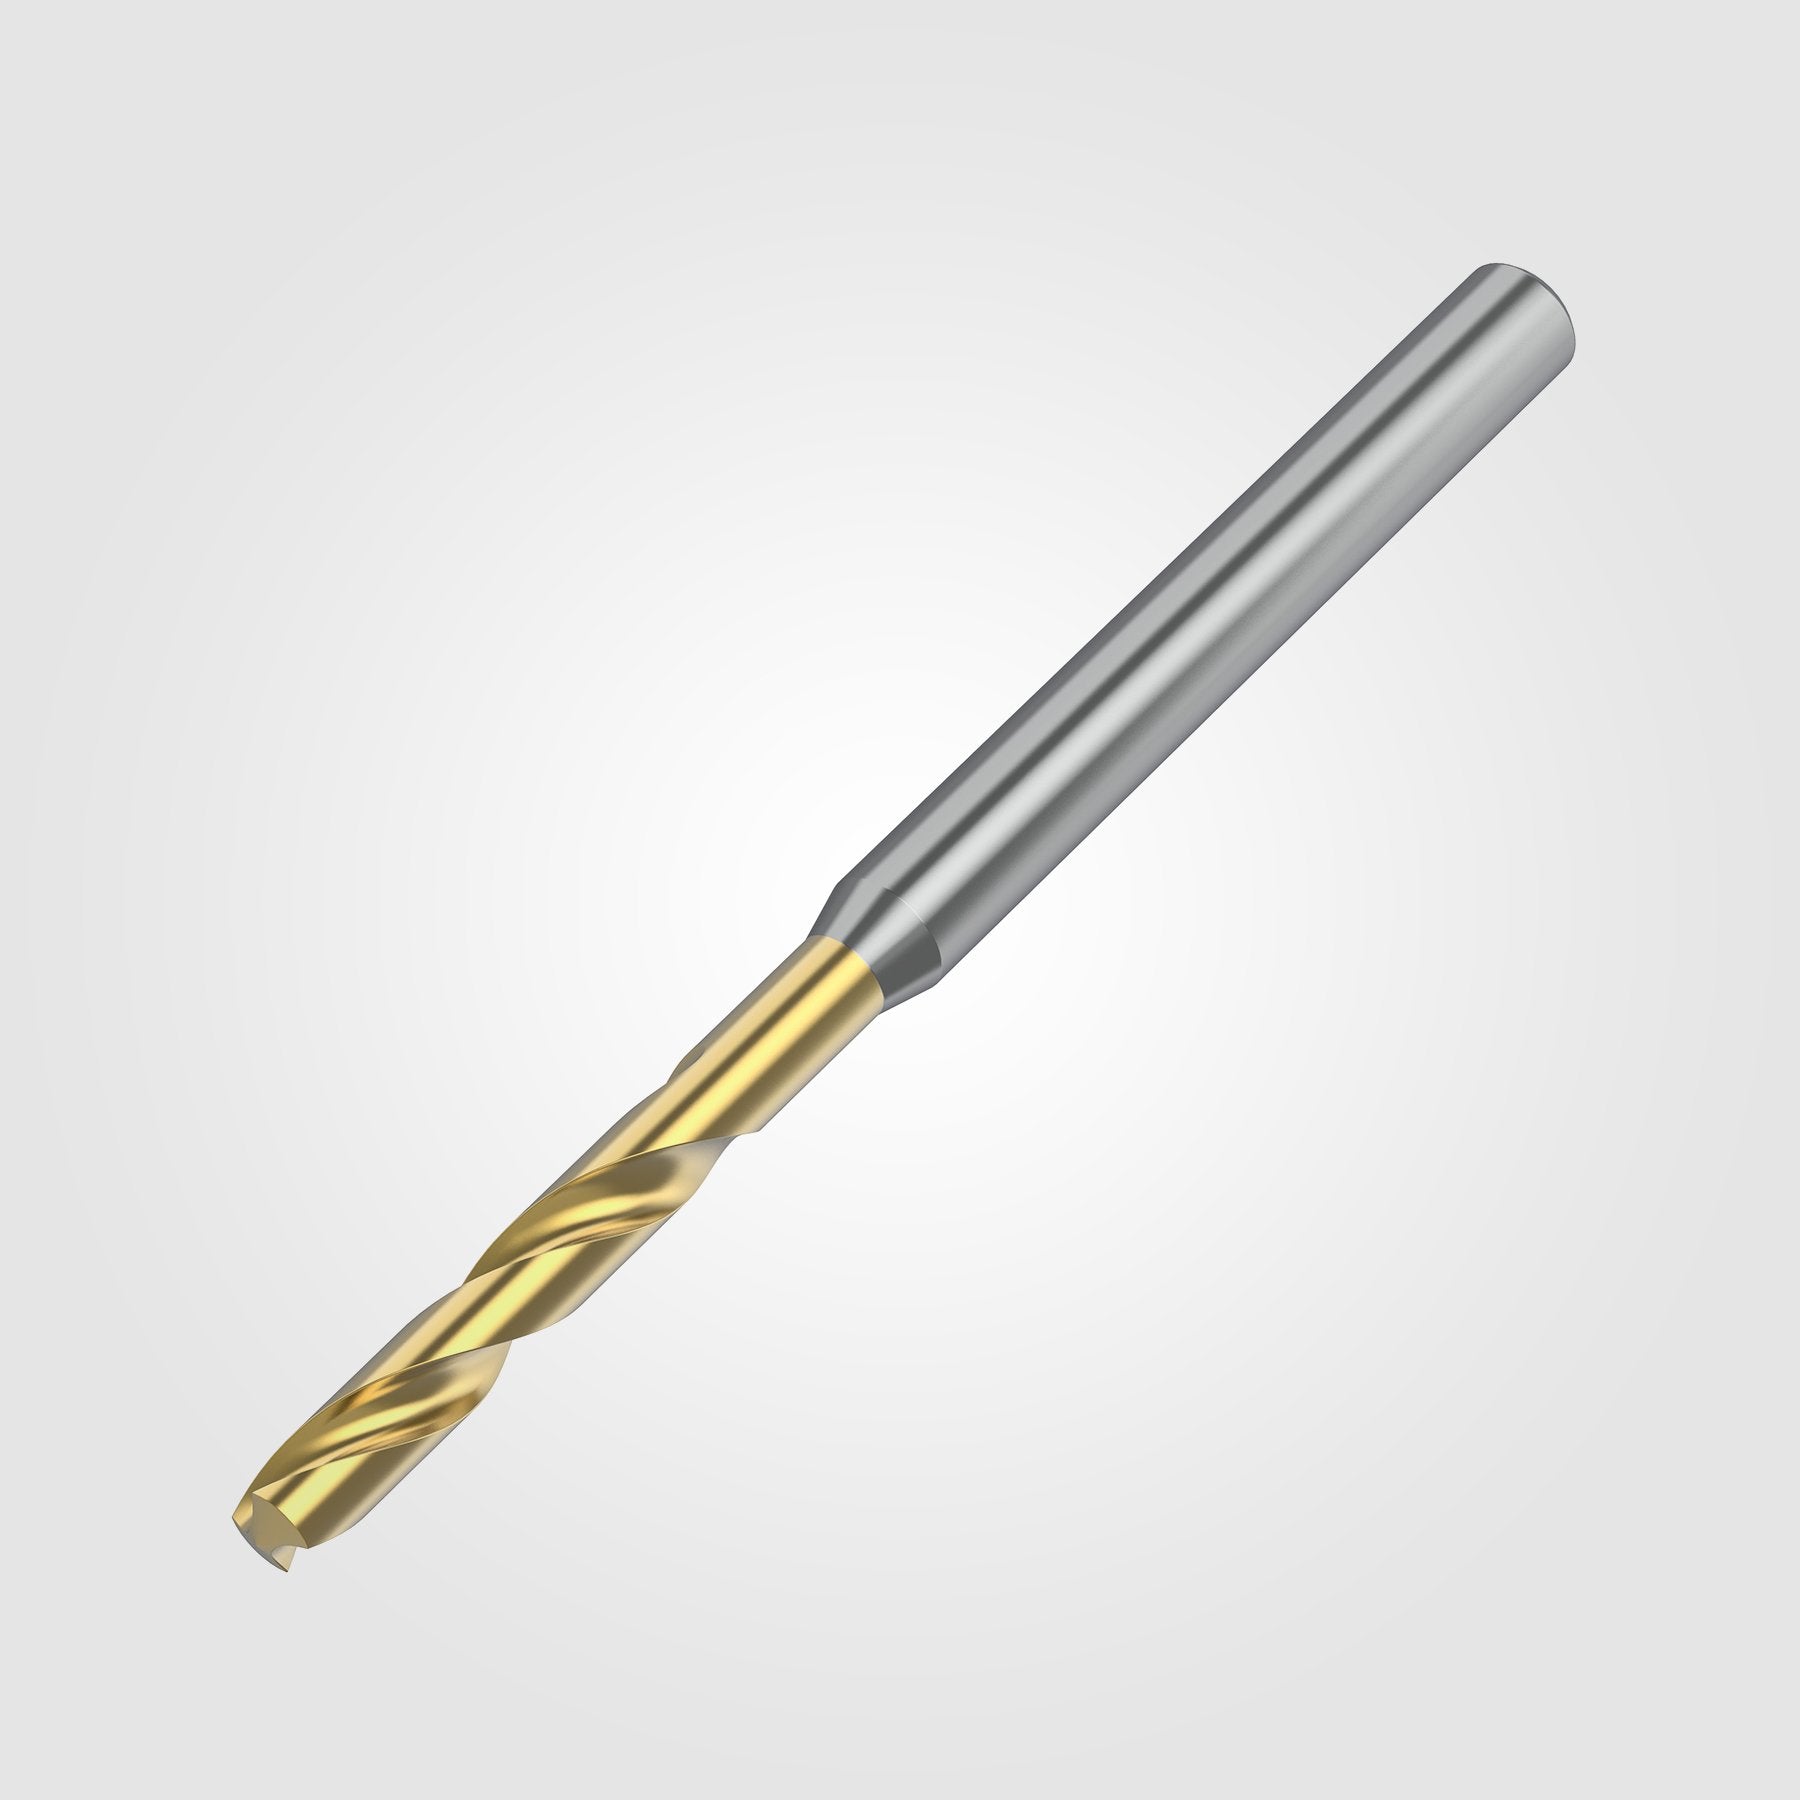 GOdrill (THROUGH COOLANT) | 5.2mm / .2047" / 3xD | SOLID CARBIDE DRILL | 4151138